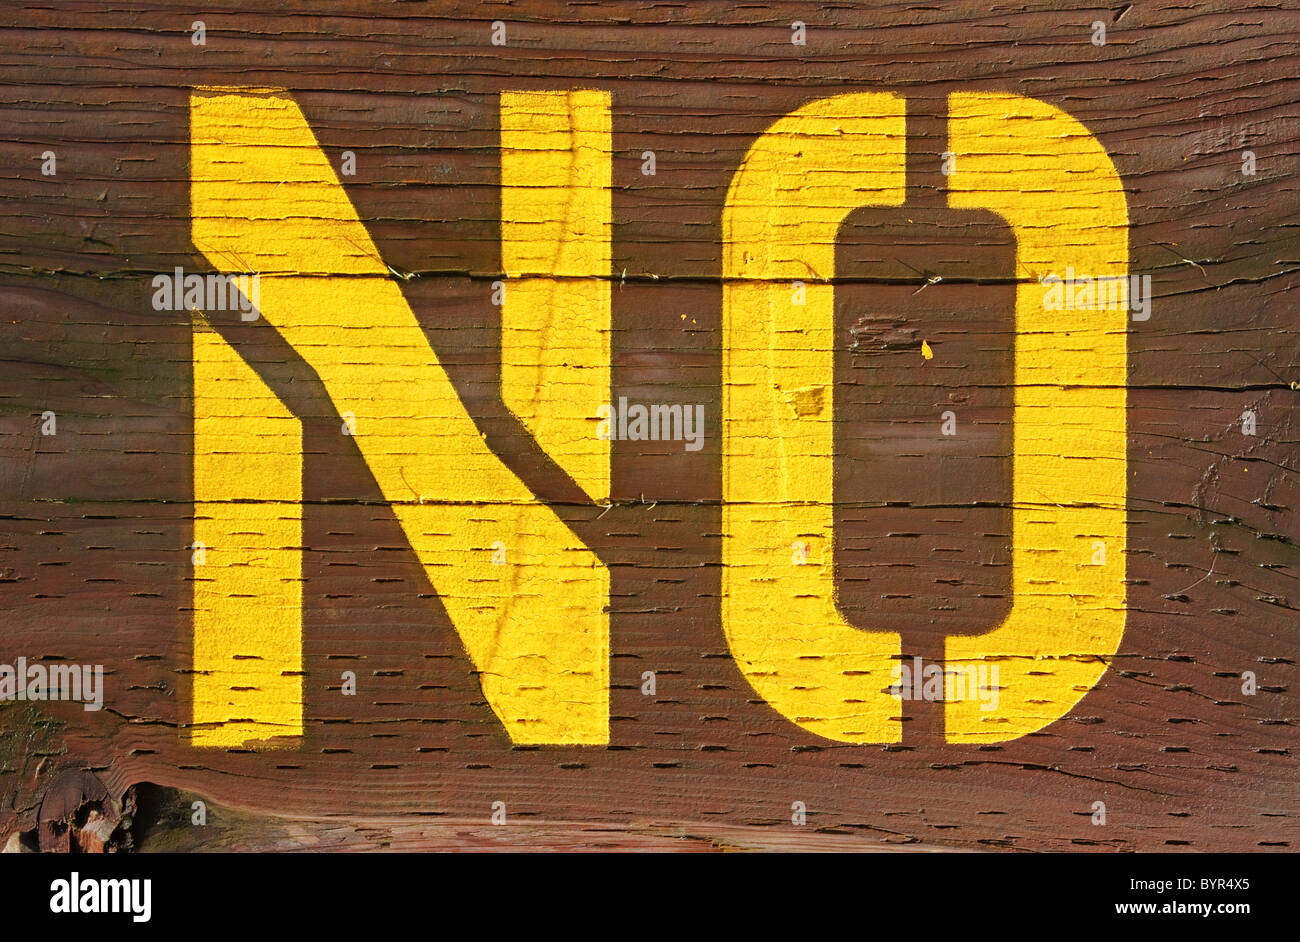 no sign stenciled on wood Stock Photo